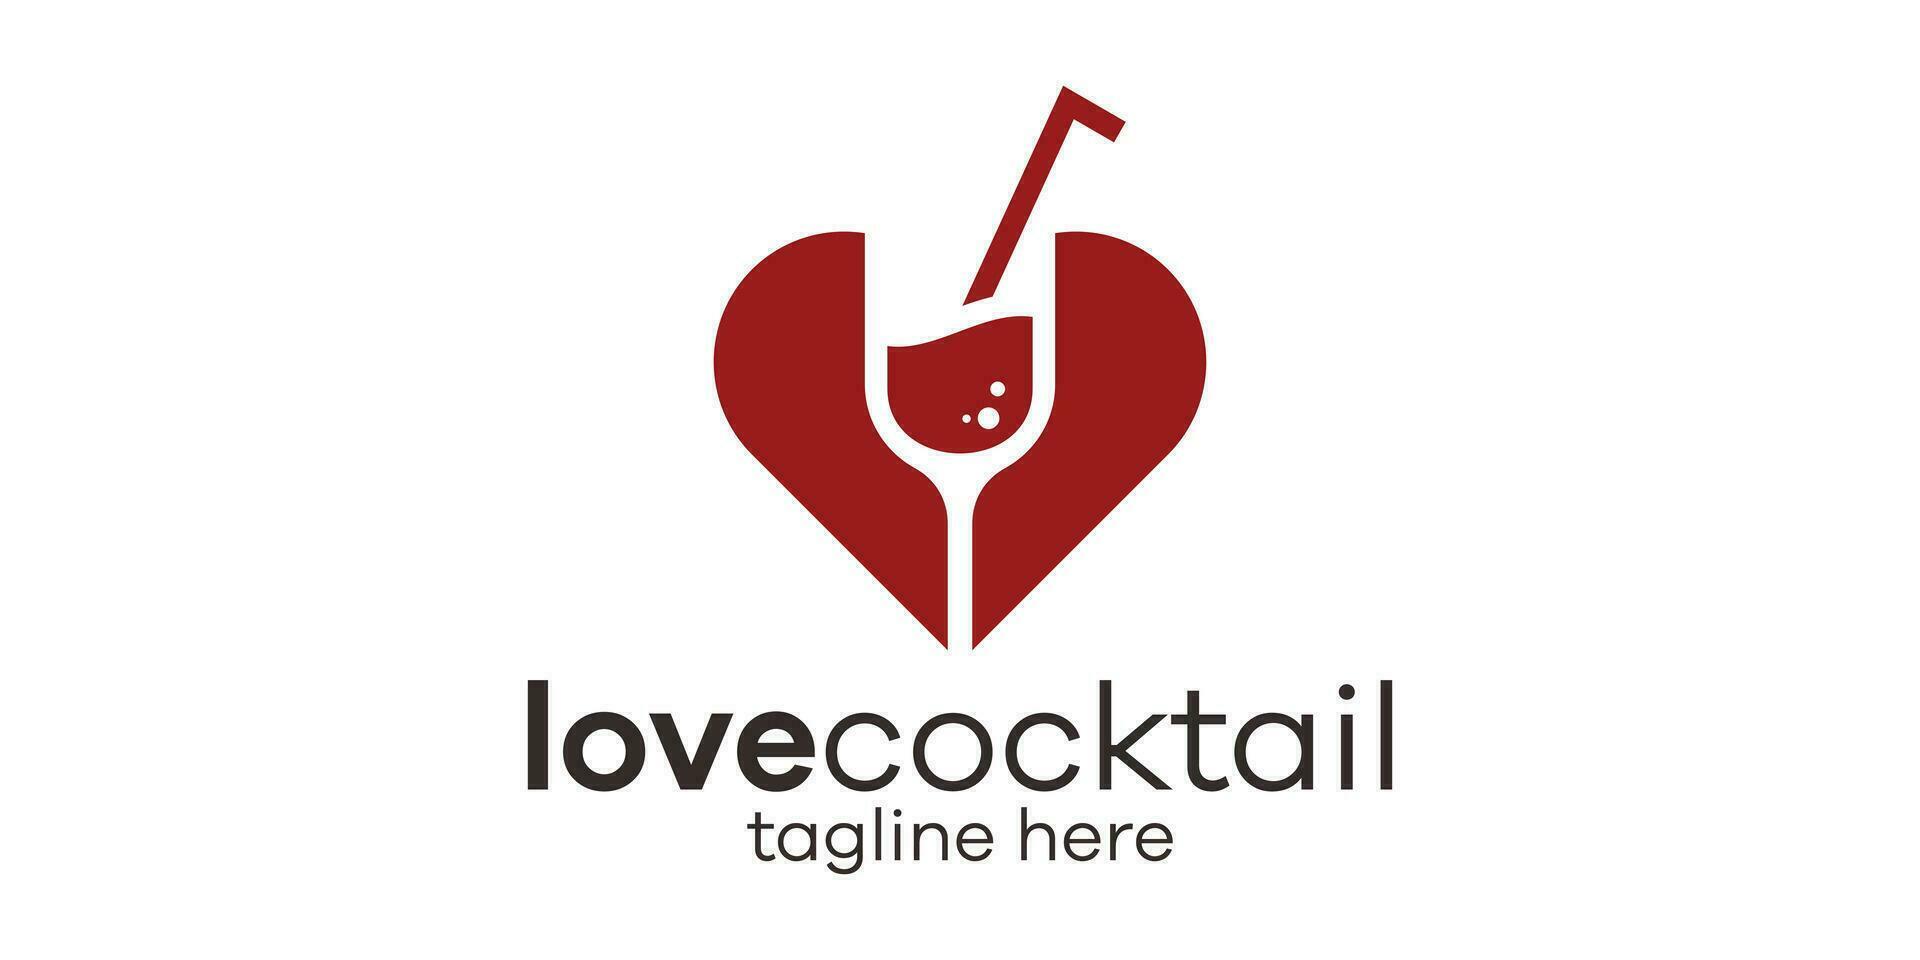 love and cocktail logo design icon vector illustration 11